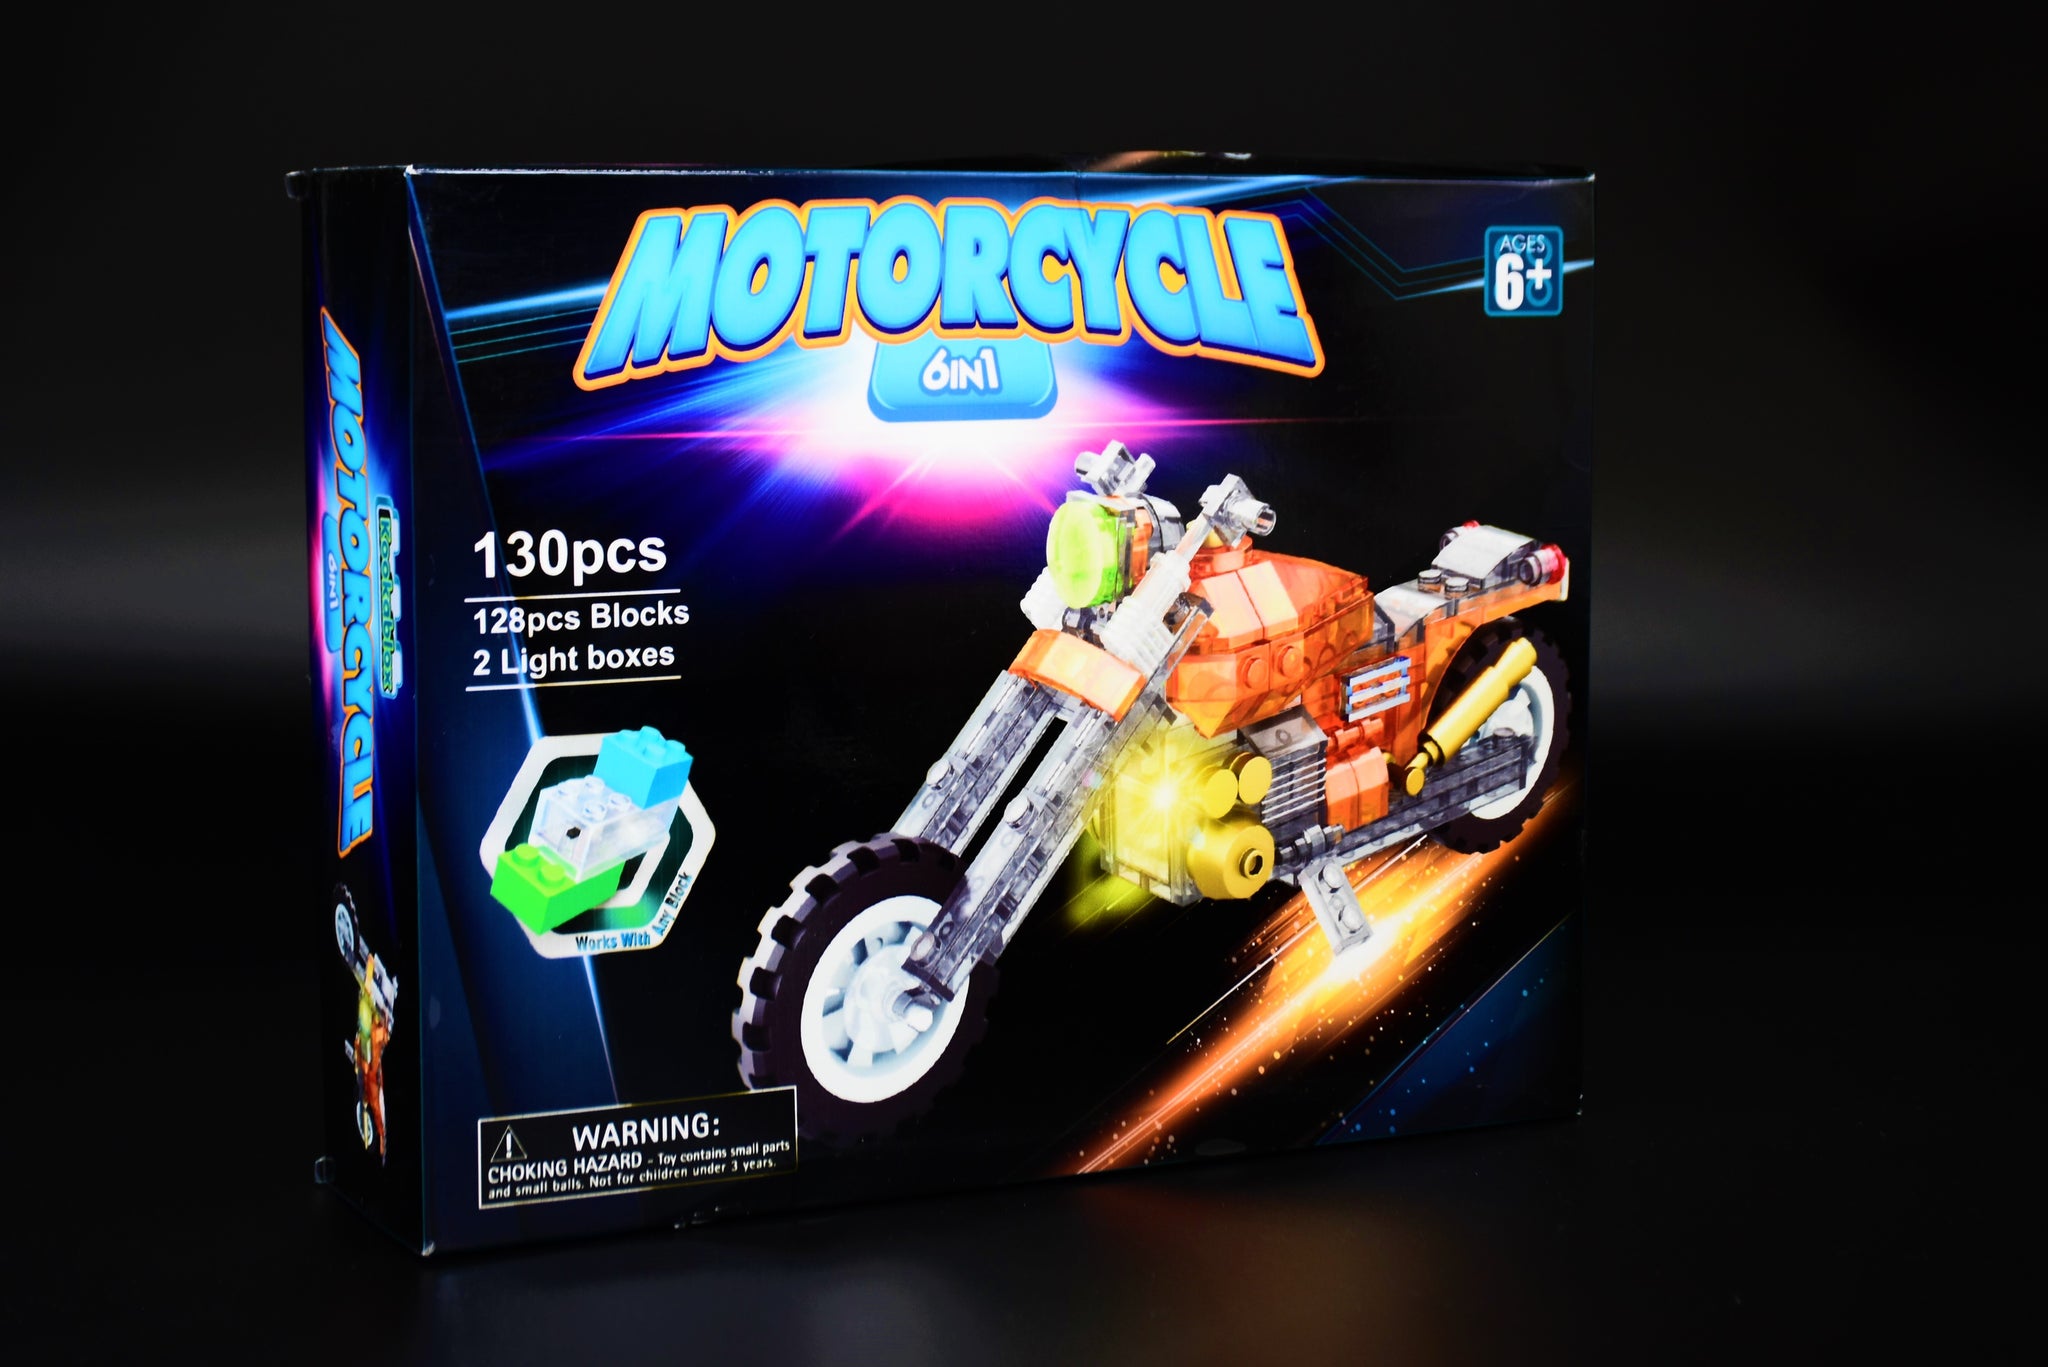 6 in 1 Motorcycle Building Block Kit with LED Lightbox | Transforms Into 6 Fun Toys. (Compatible with other bricks, 130 Pieces)